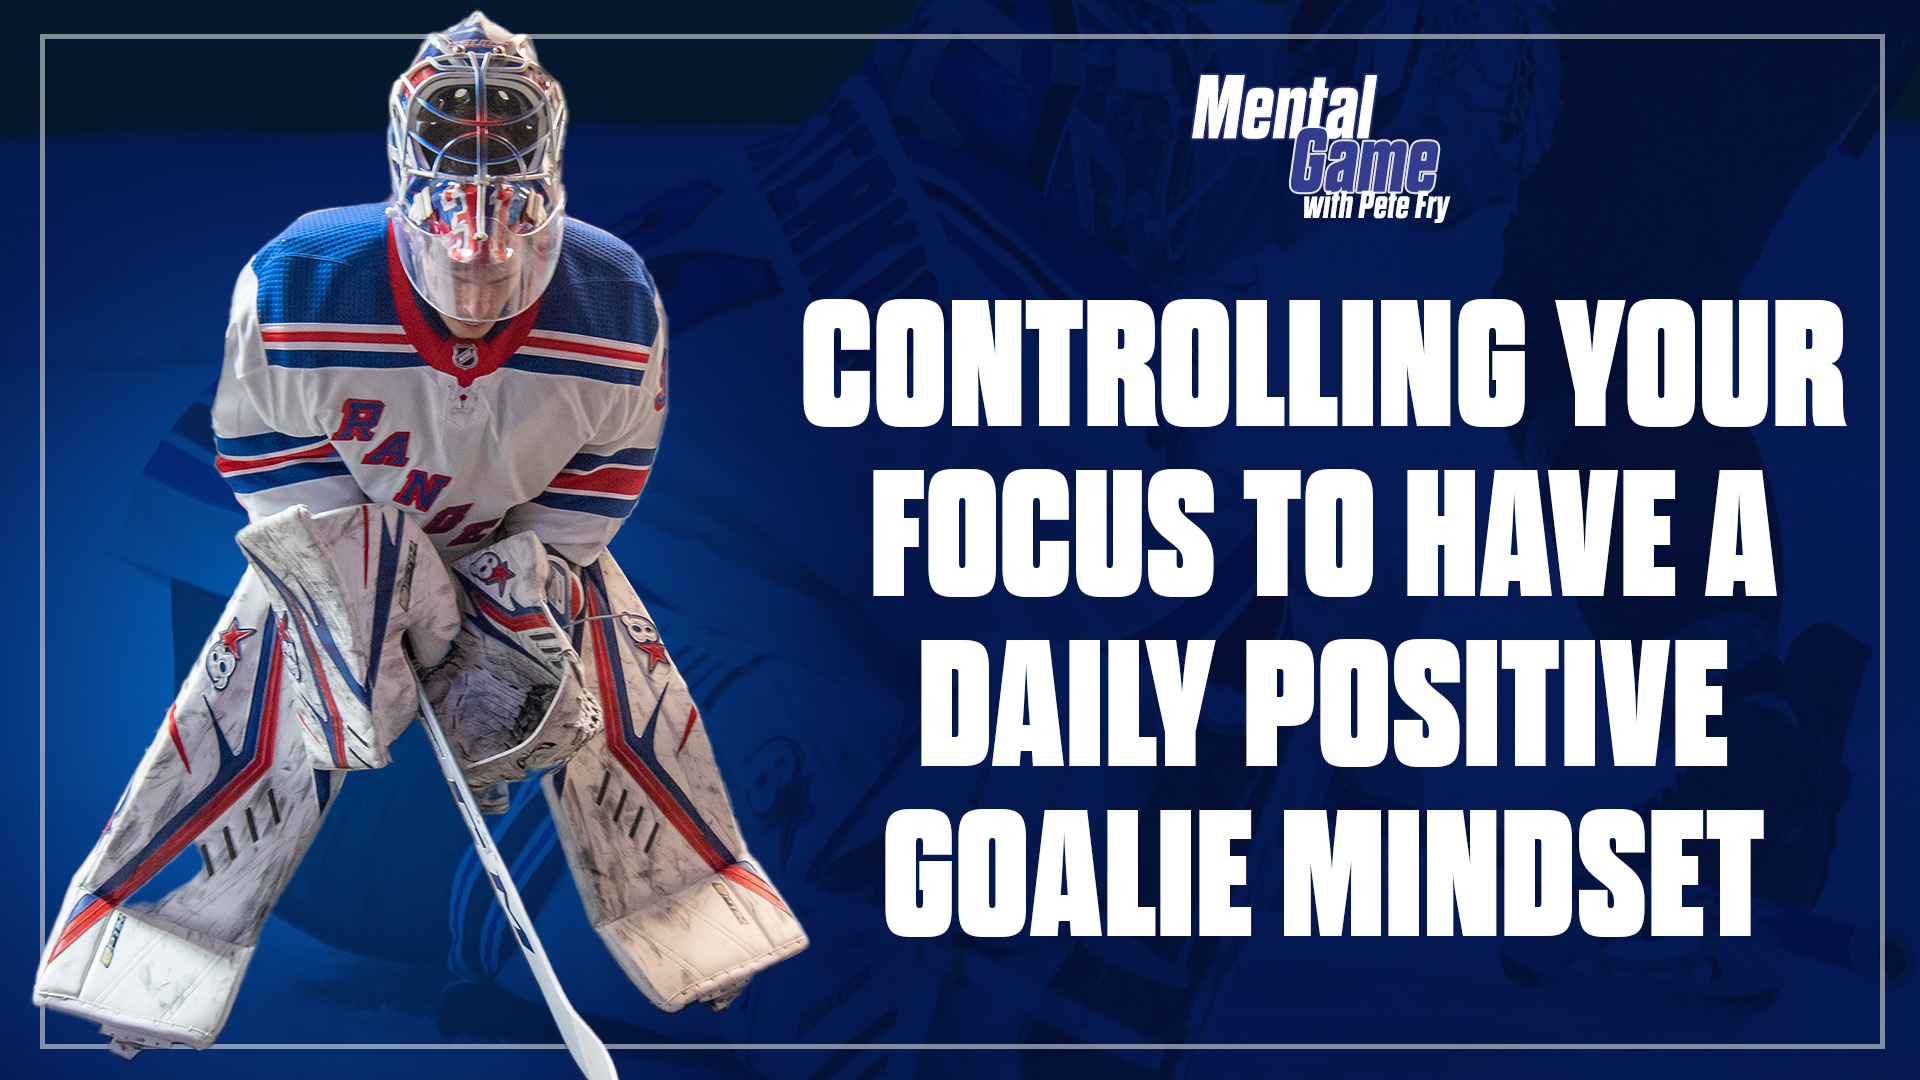 Controlling Your Focus To Have A Daily Positive Goalie Mindset